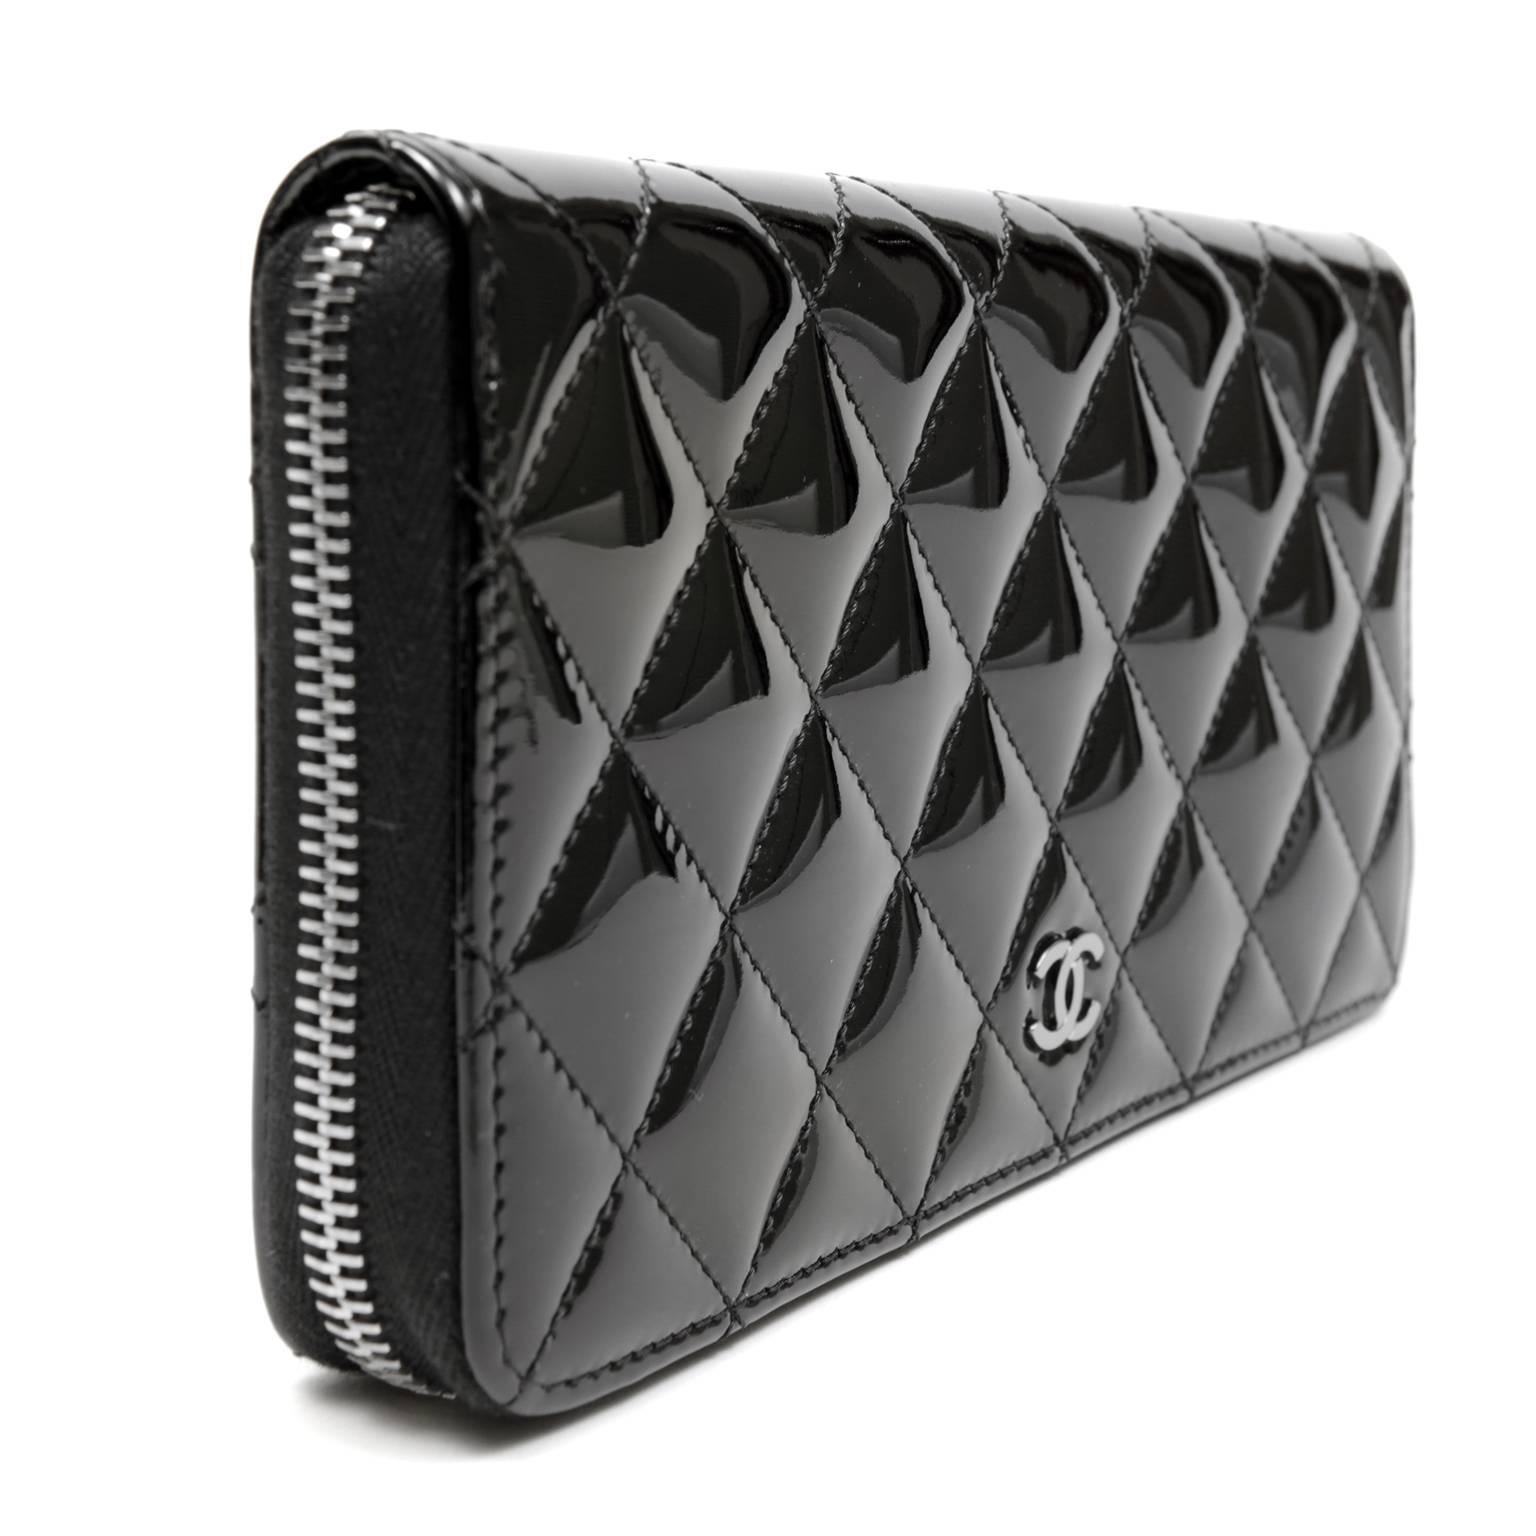 Chanel Black Patent Leather Zip Around Wallet- PRISTINE; Never Carried
Quilted patent leather is ultra-durable, perfect for an often handled accessory. 
 
Large quilted black patent leather wallet has silver zipper on three sides.  Gusseted sides